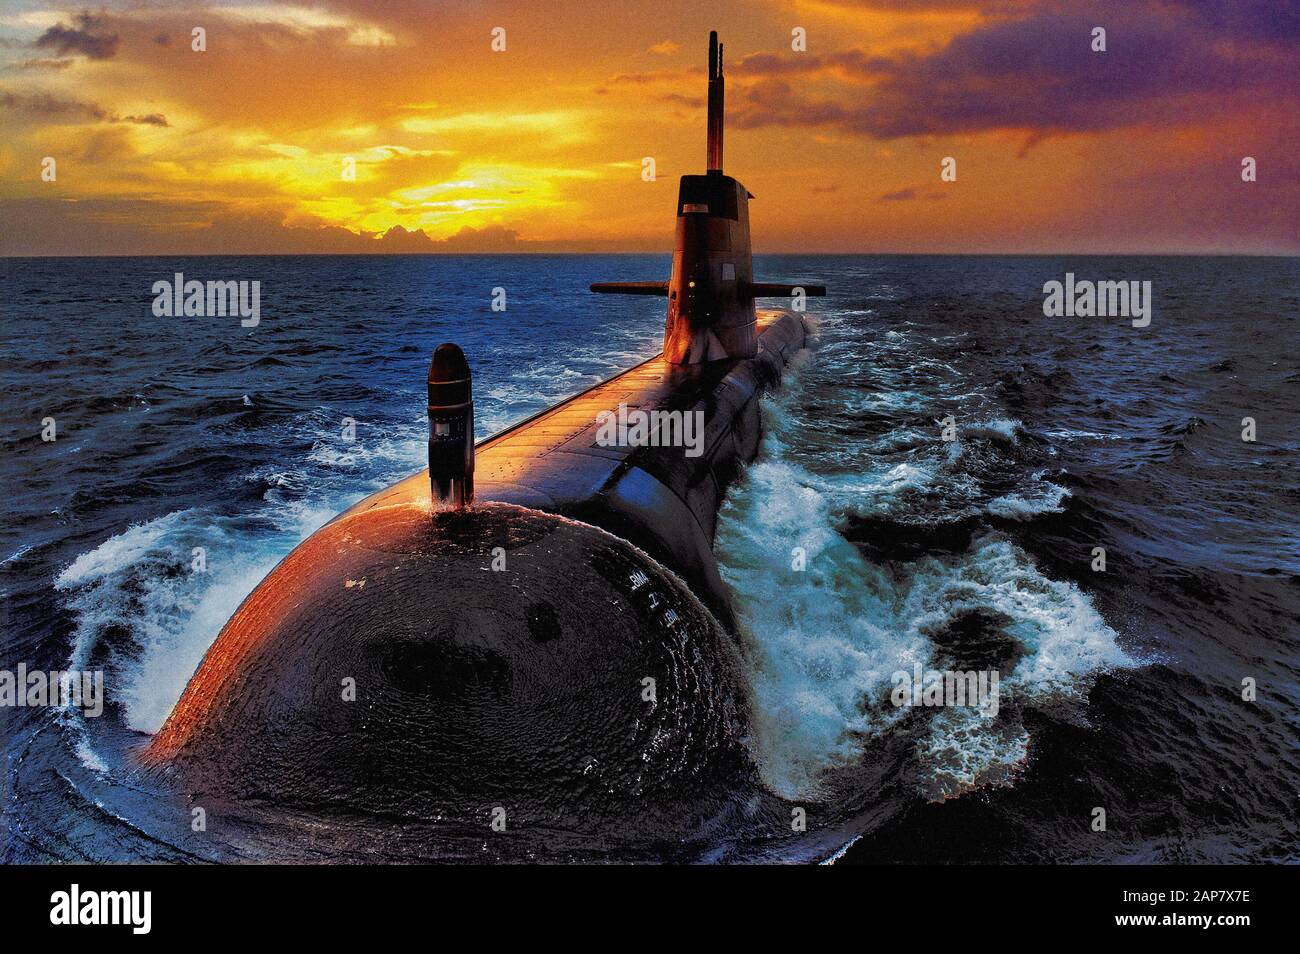 A close up view of a dramatic sunset illuminating an Australian Navy Collins Class diesel electric submarine at sea. Stock Photo